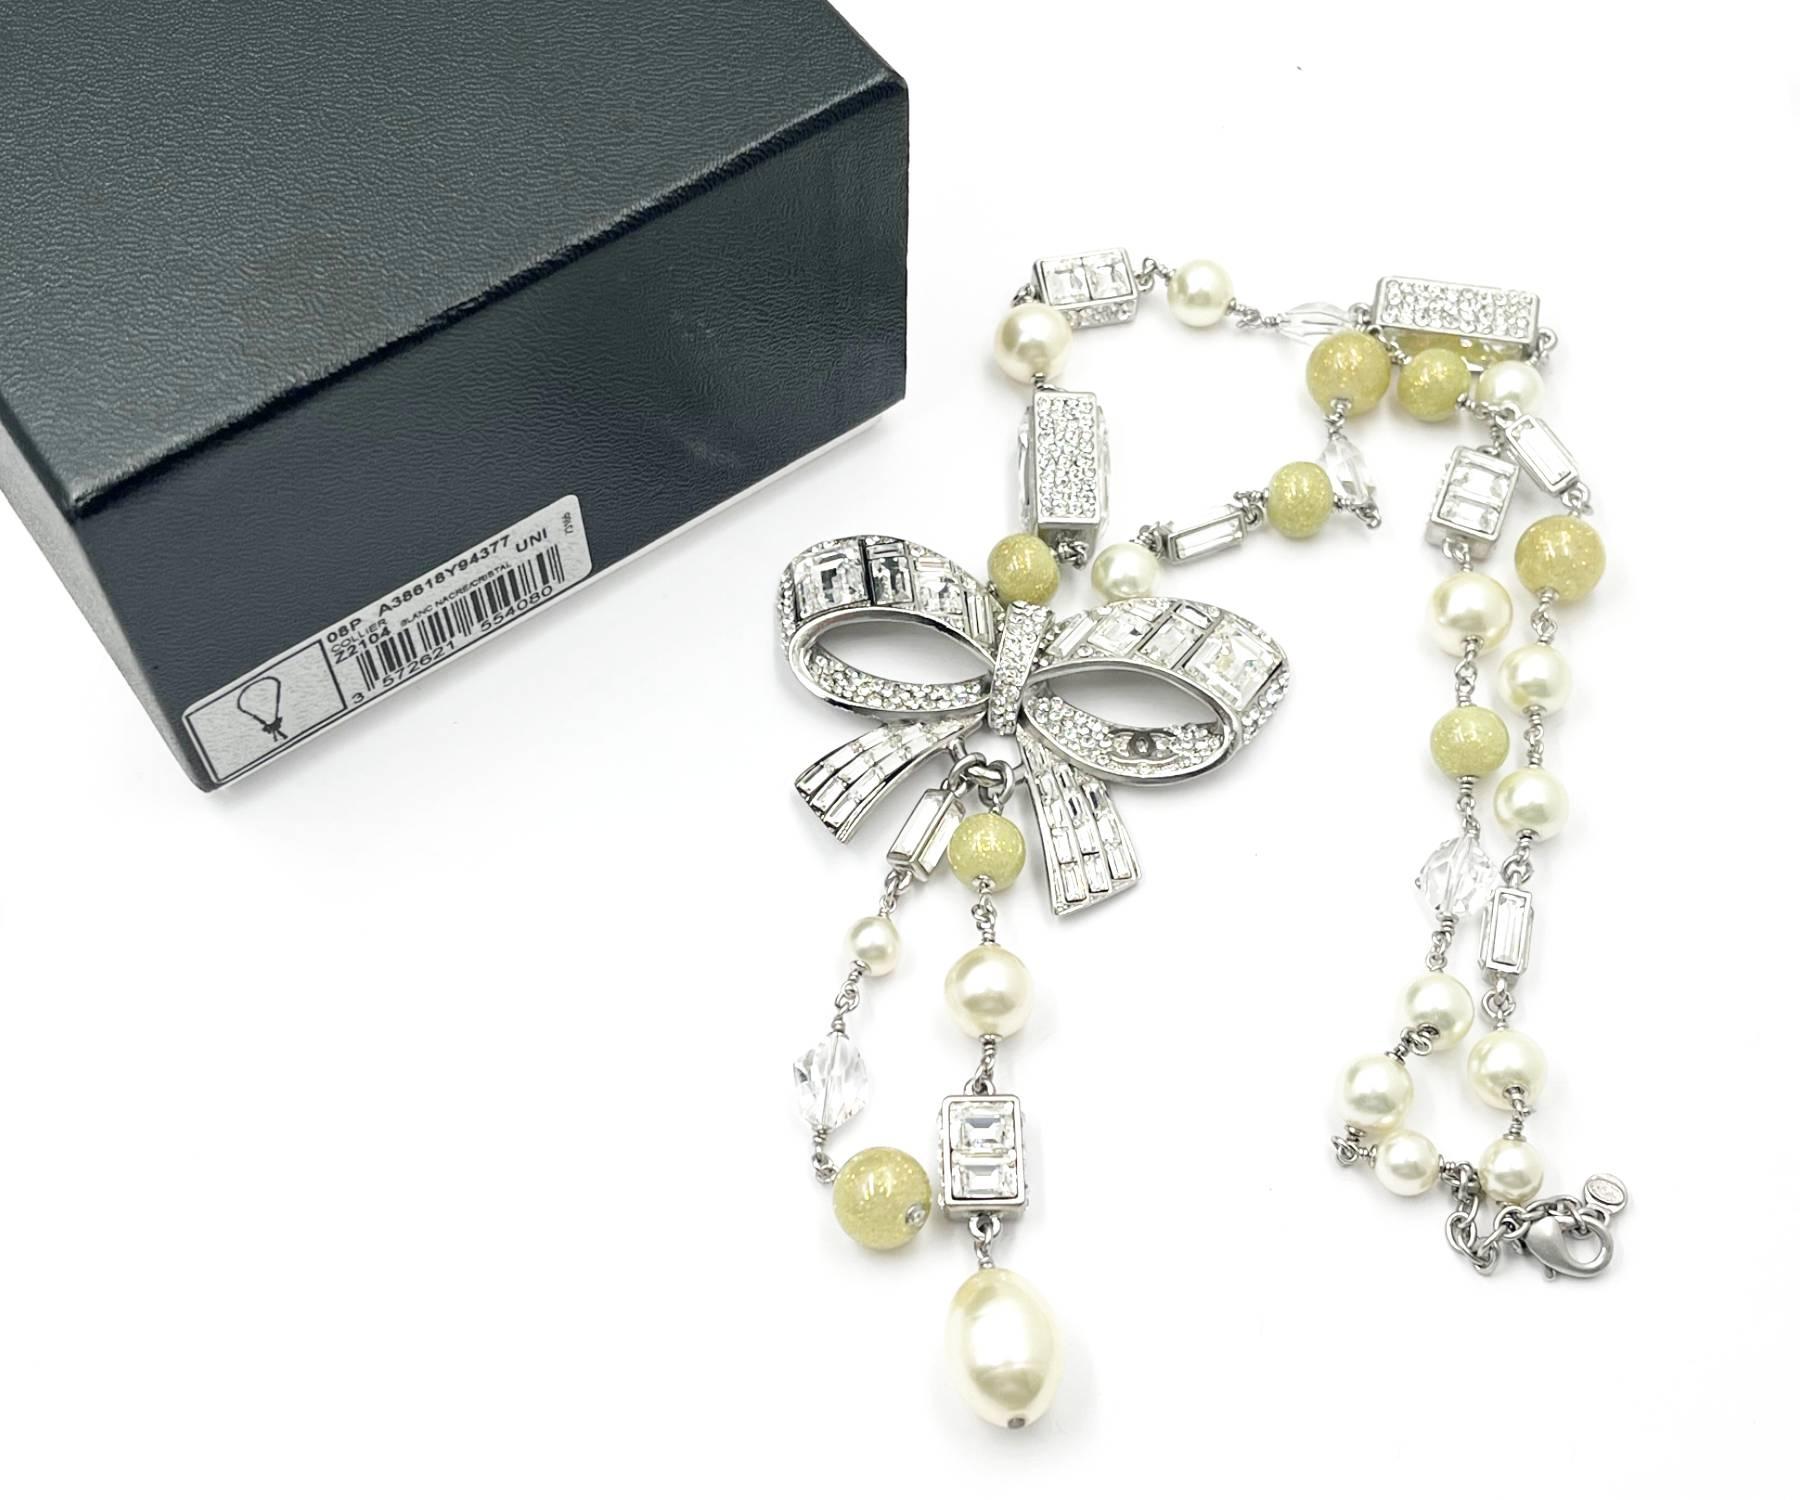 Chanel Silver Ribbon Bow CC Crystal Neon Bead Pearl Necklace

*Marked 08
*Made in Italy
*Comes with the original box and barcode

-It is approximately 26